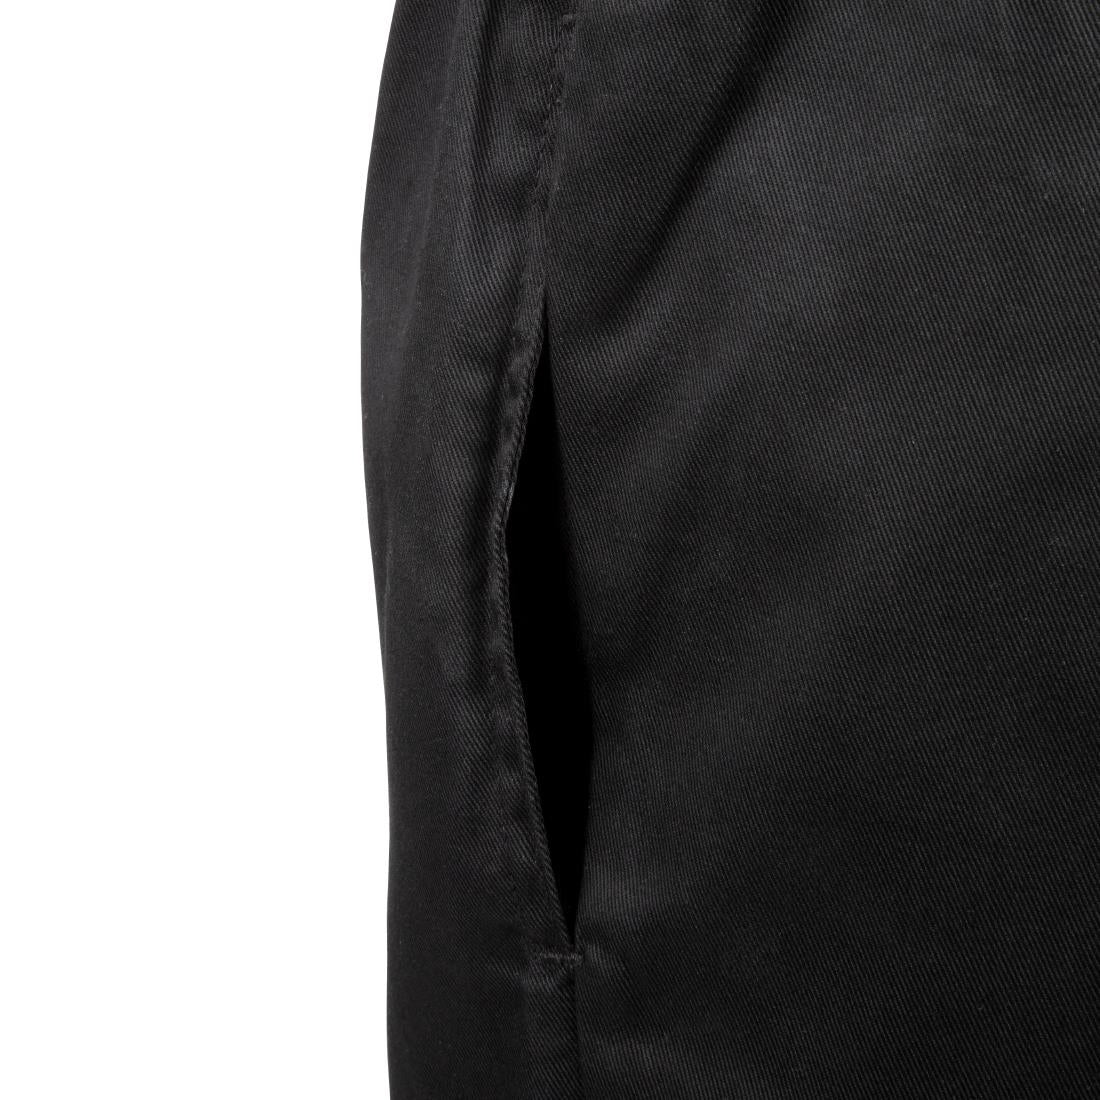 B223 Chef Works Womens Basic Baggy Chefs Trousers Black